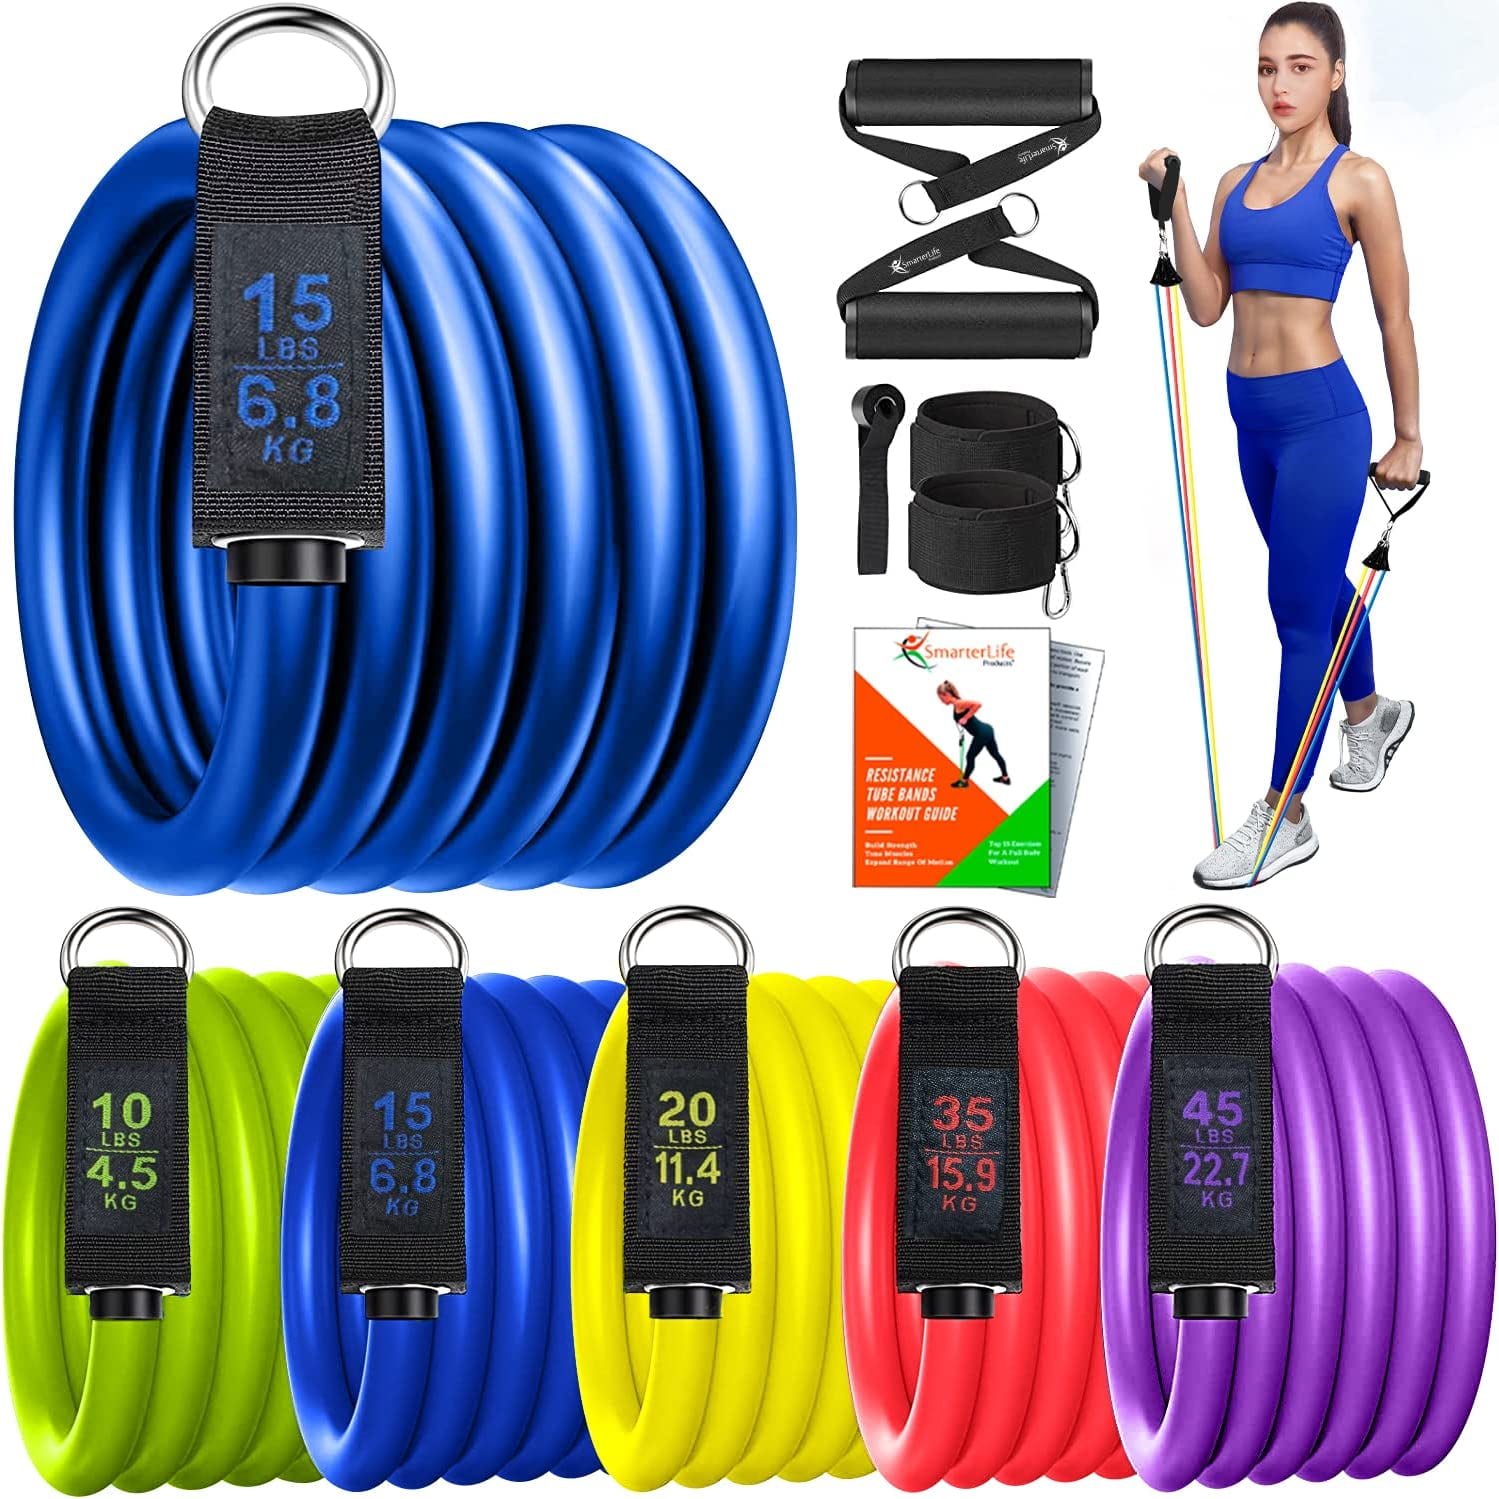 SmarterLife Resistance Tube Bands Exercise Bands for Working Out, 5-Pc Set  